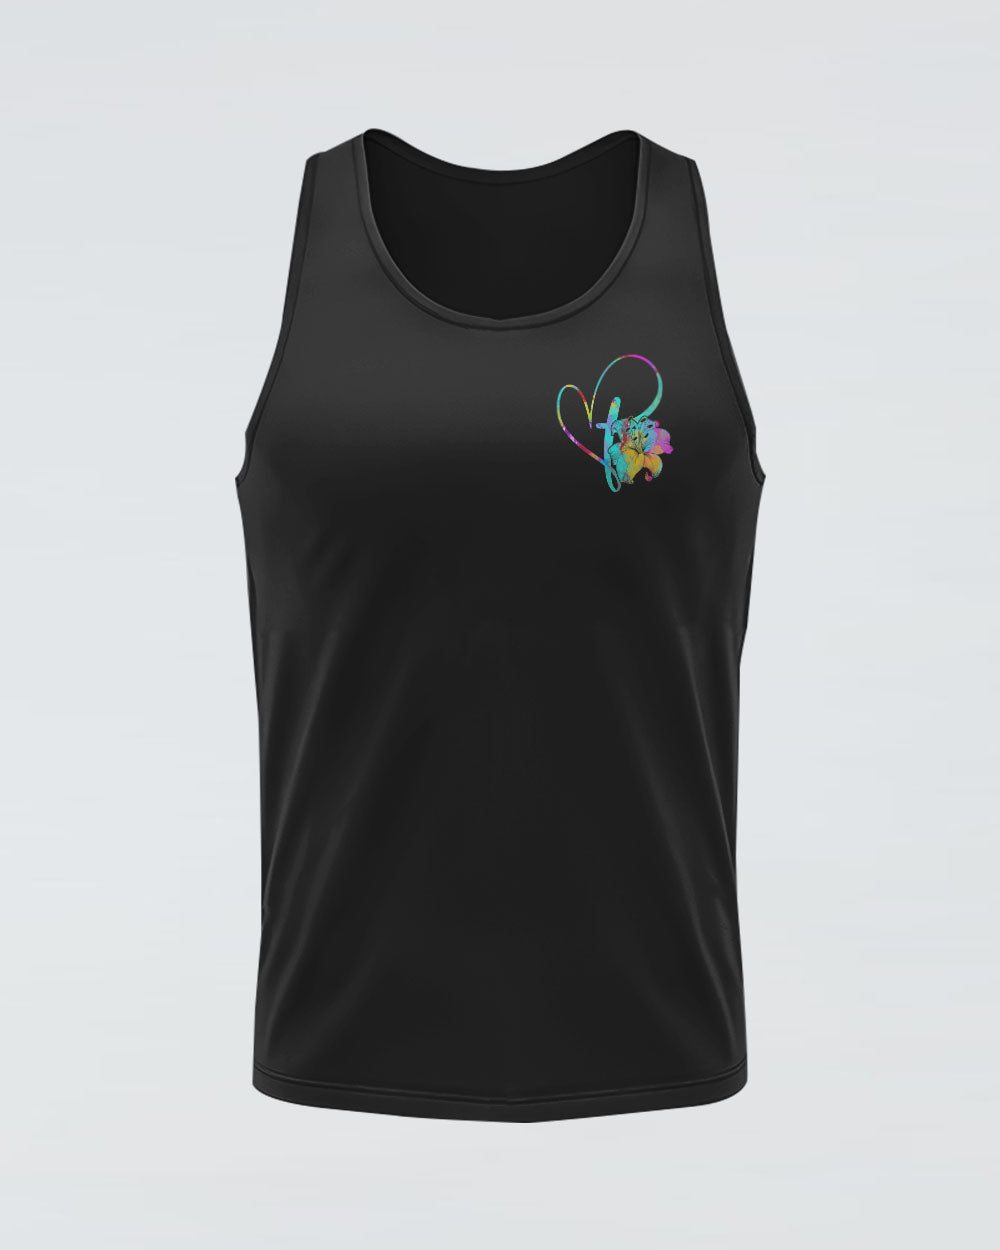 Cross With Lilies Colorful Watercolor Women's Christian Tanks